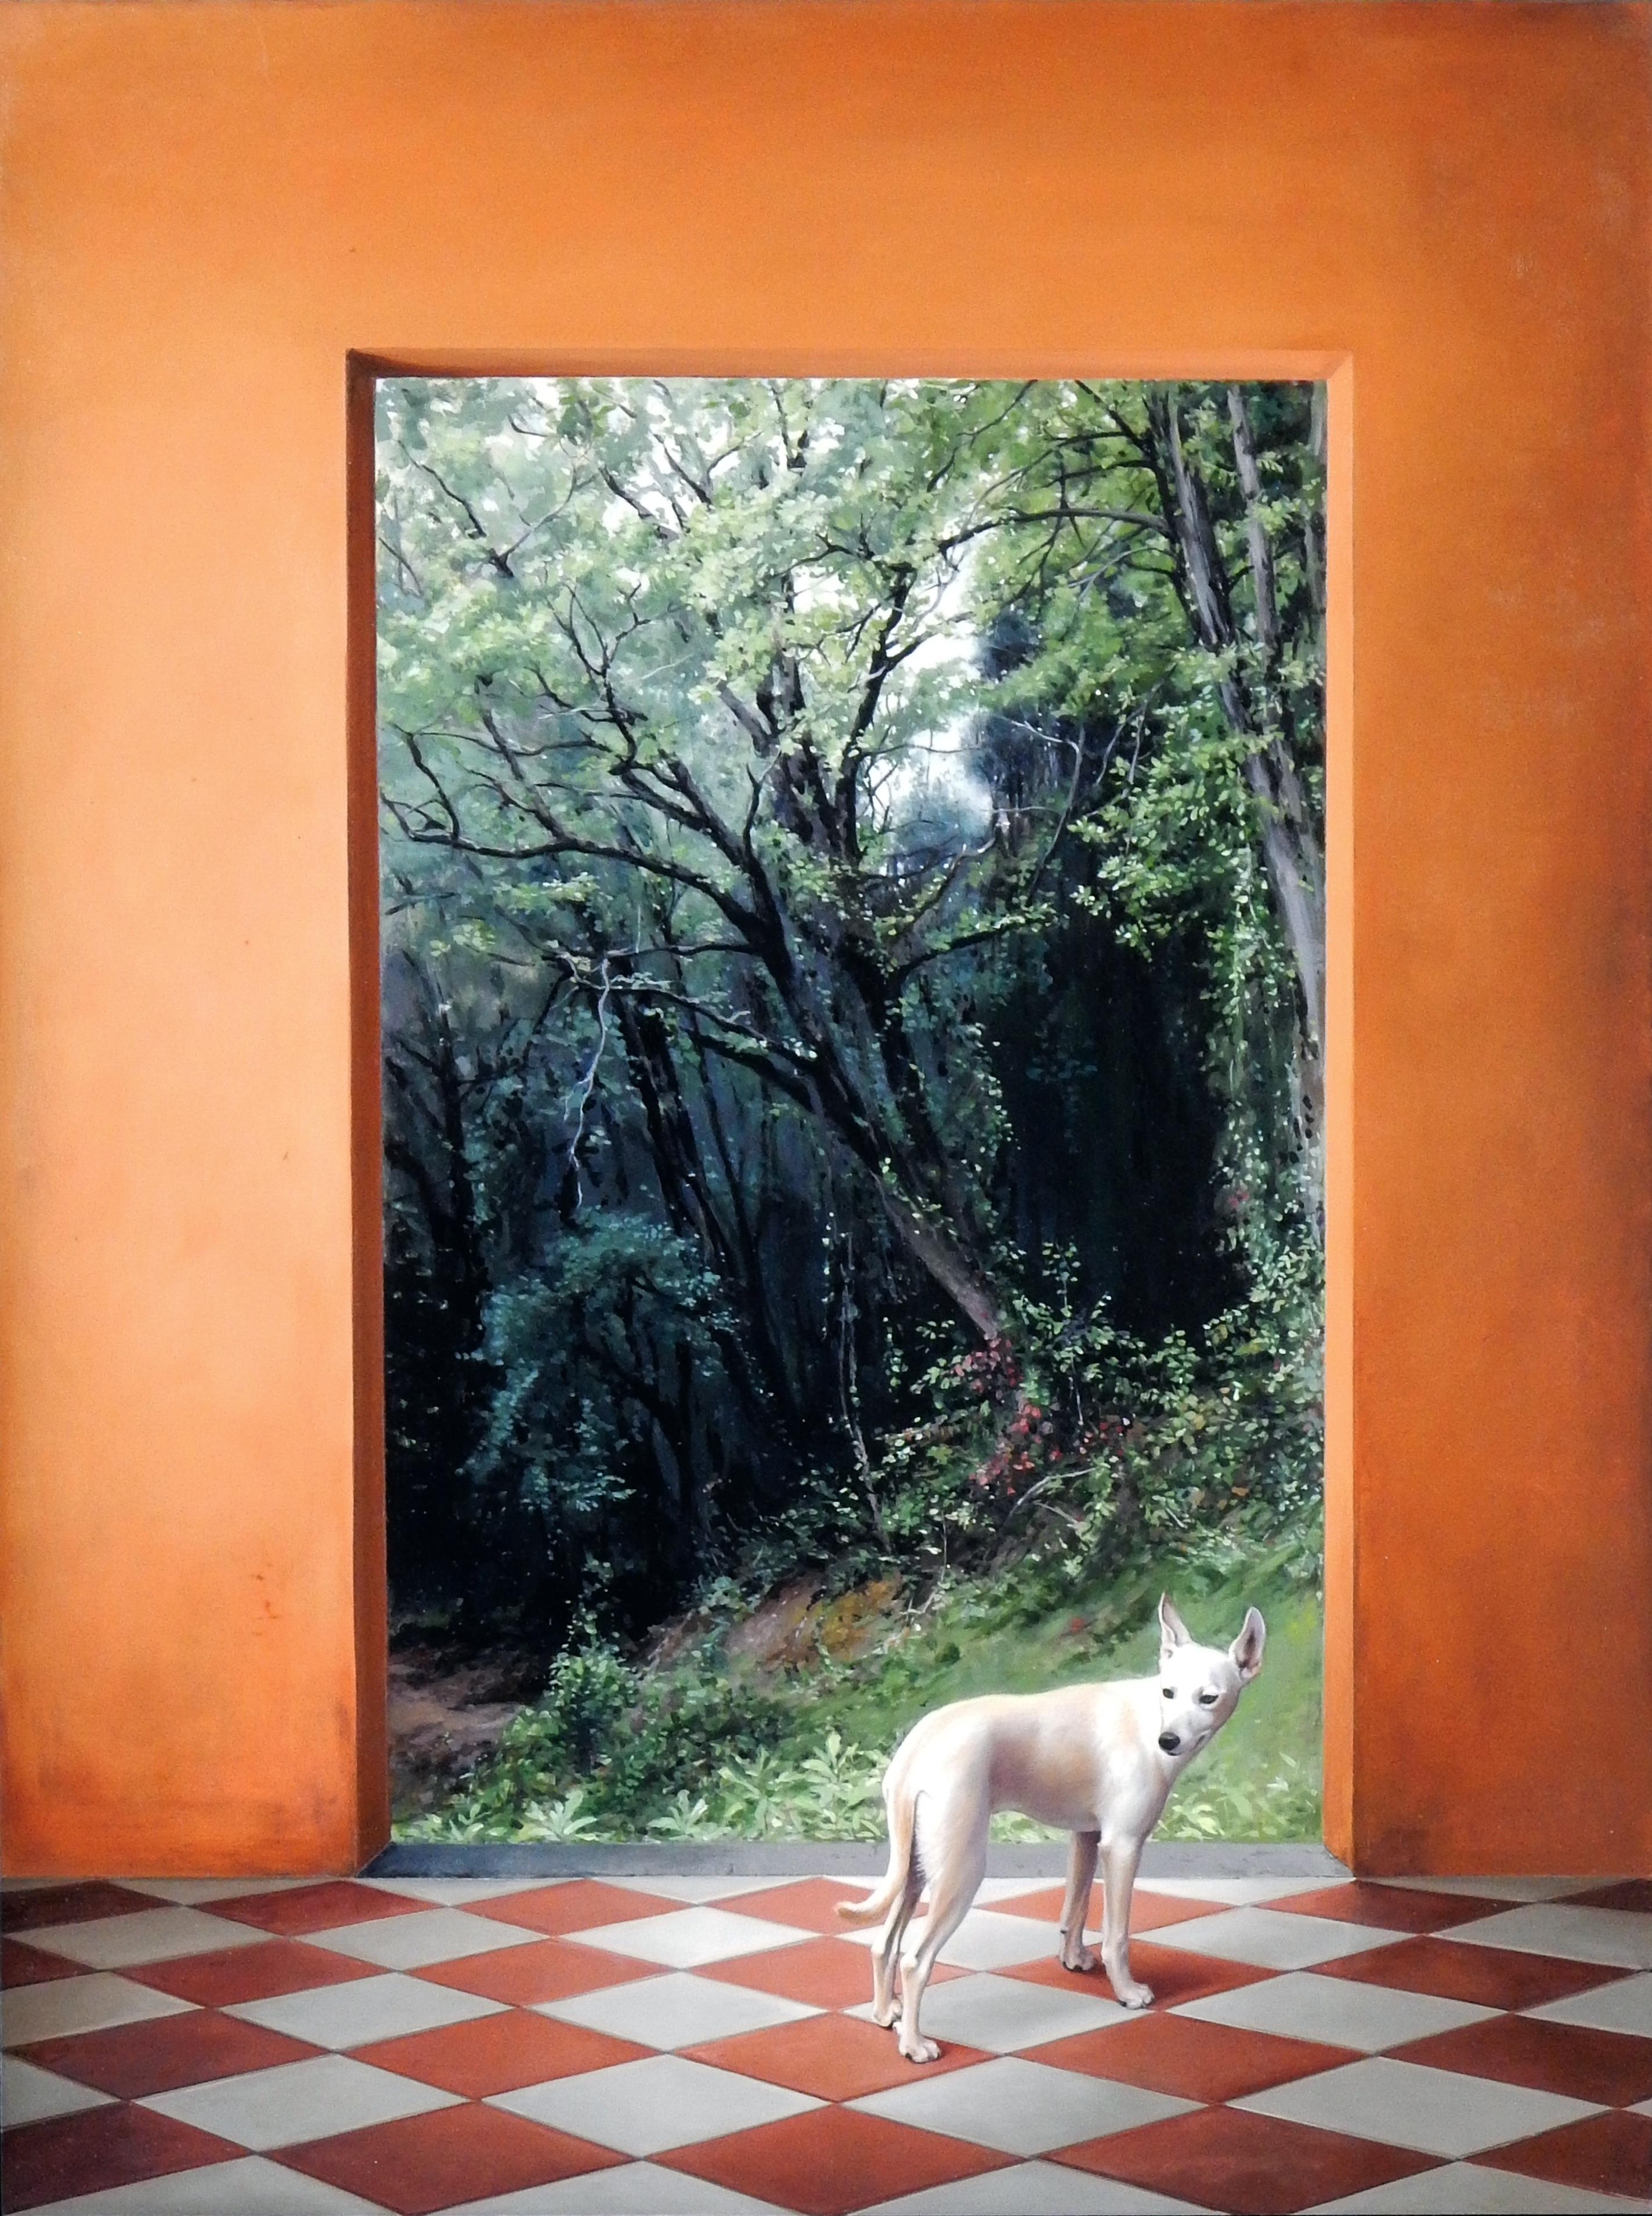 Carol Pylant Animal Painting – Ibizan Fall - Terra Cotta Colored Architectural Walls w/ Wooded Landscape & Dog